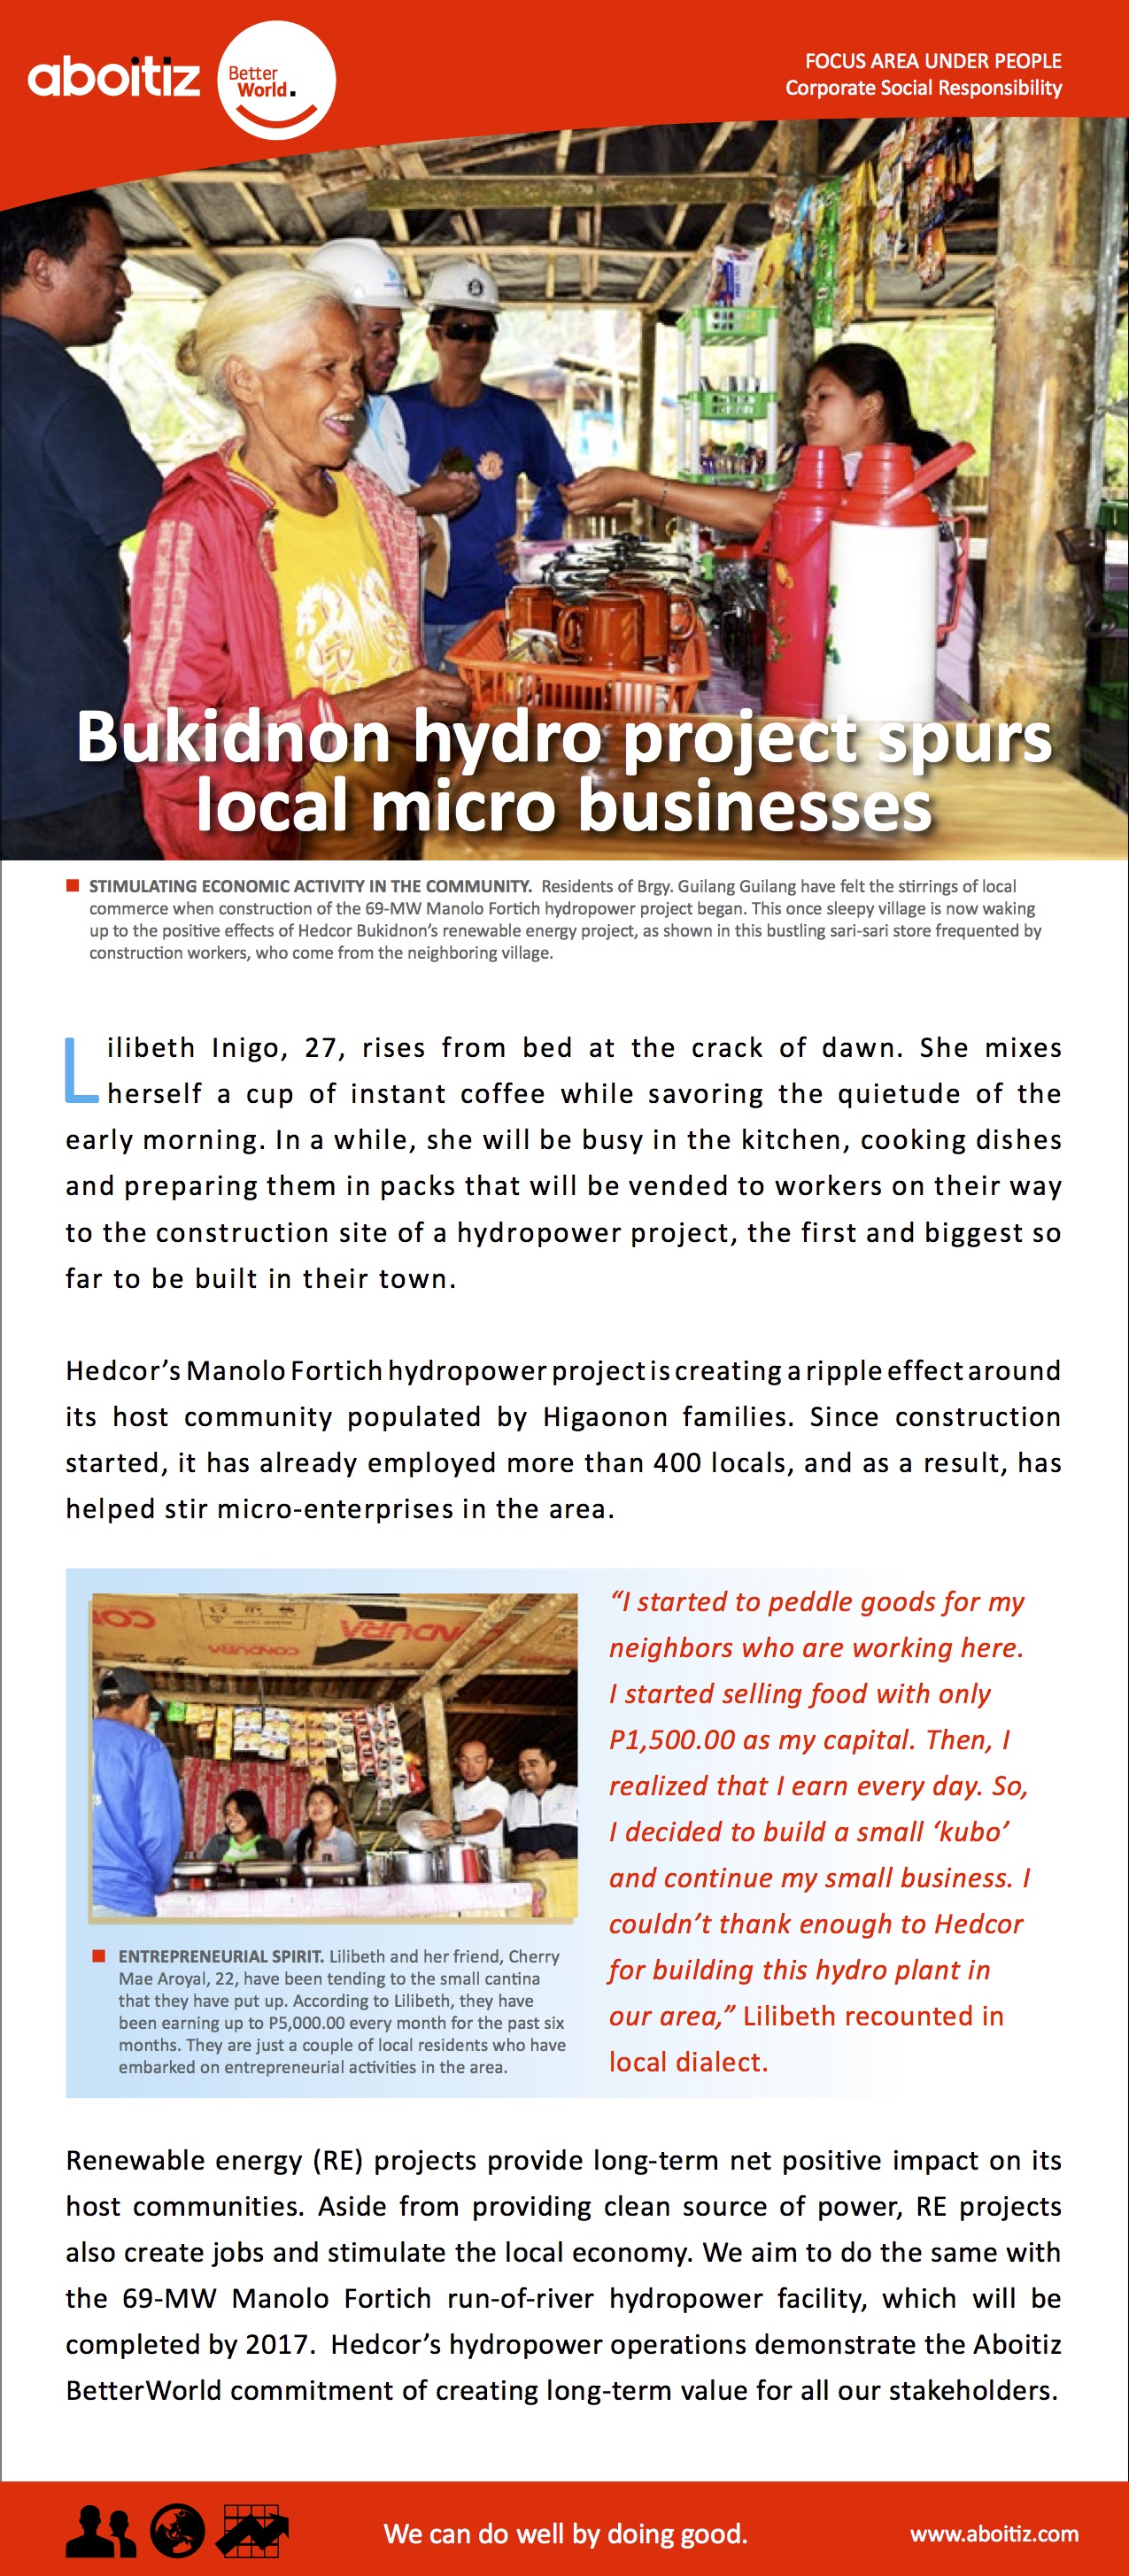 BUKIDNON HYDRO PROJECT SPURS LOCAL MICRO BUSINESSES